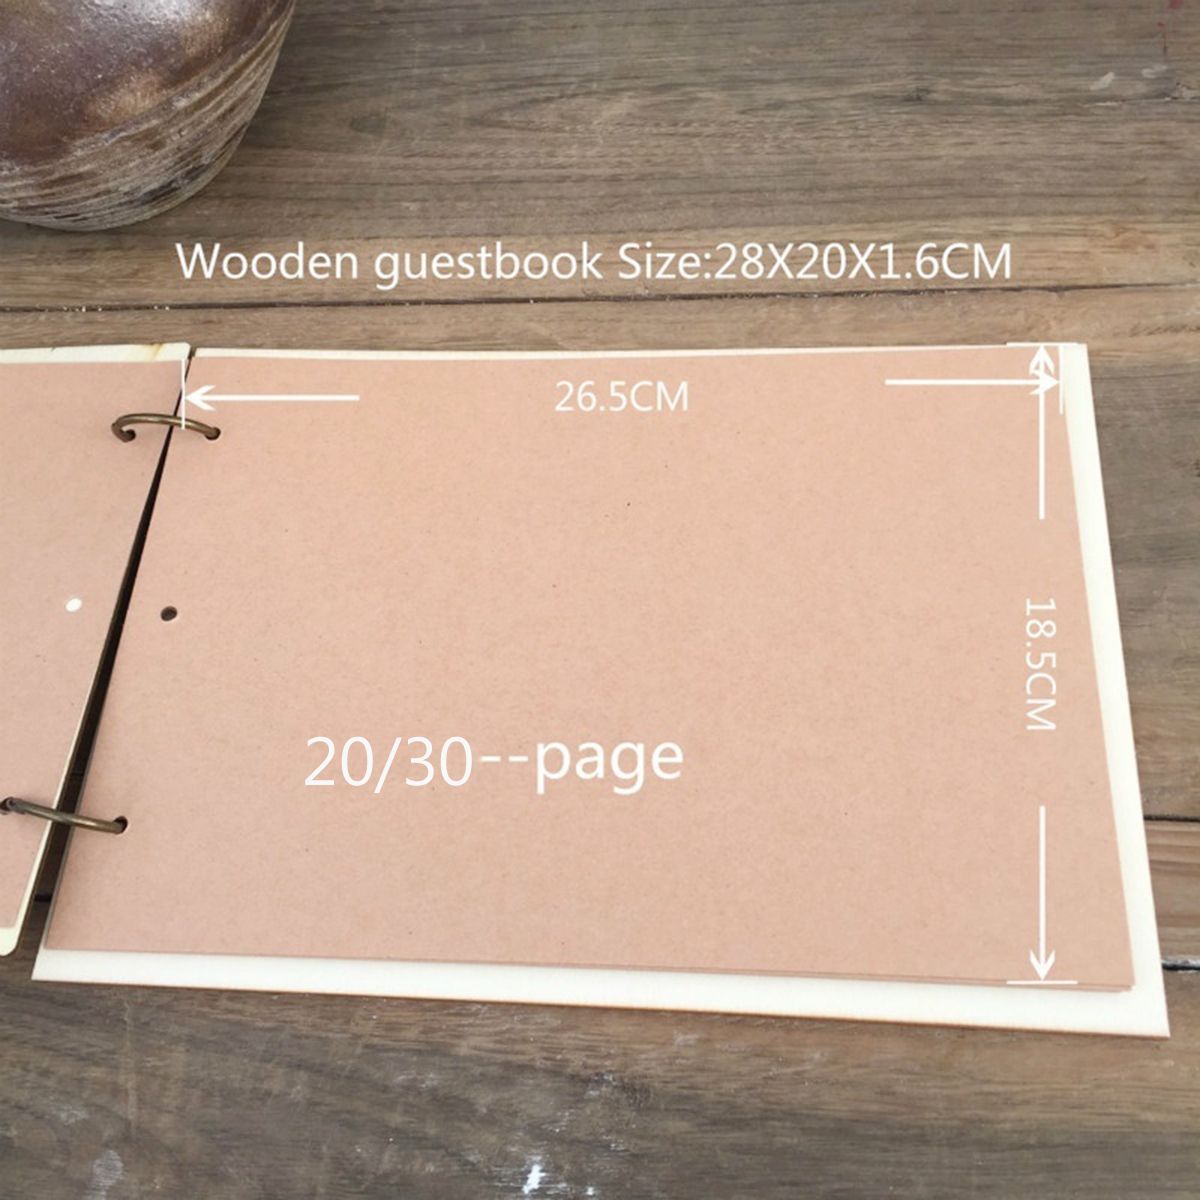 Wedding-Guest-Book-Wooden-Tree-Personalised-Signing-Book-203040-Pages-Party-Decorations-1486537